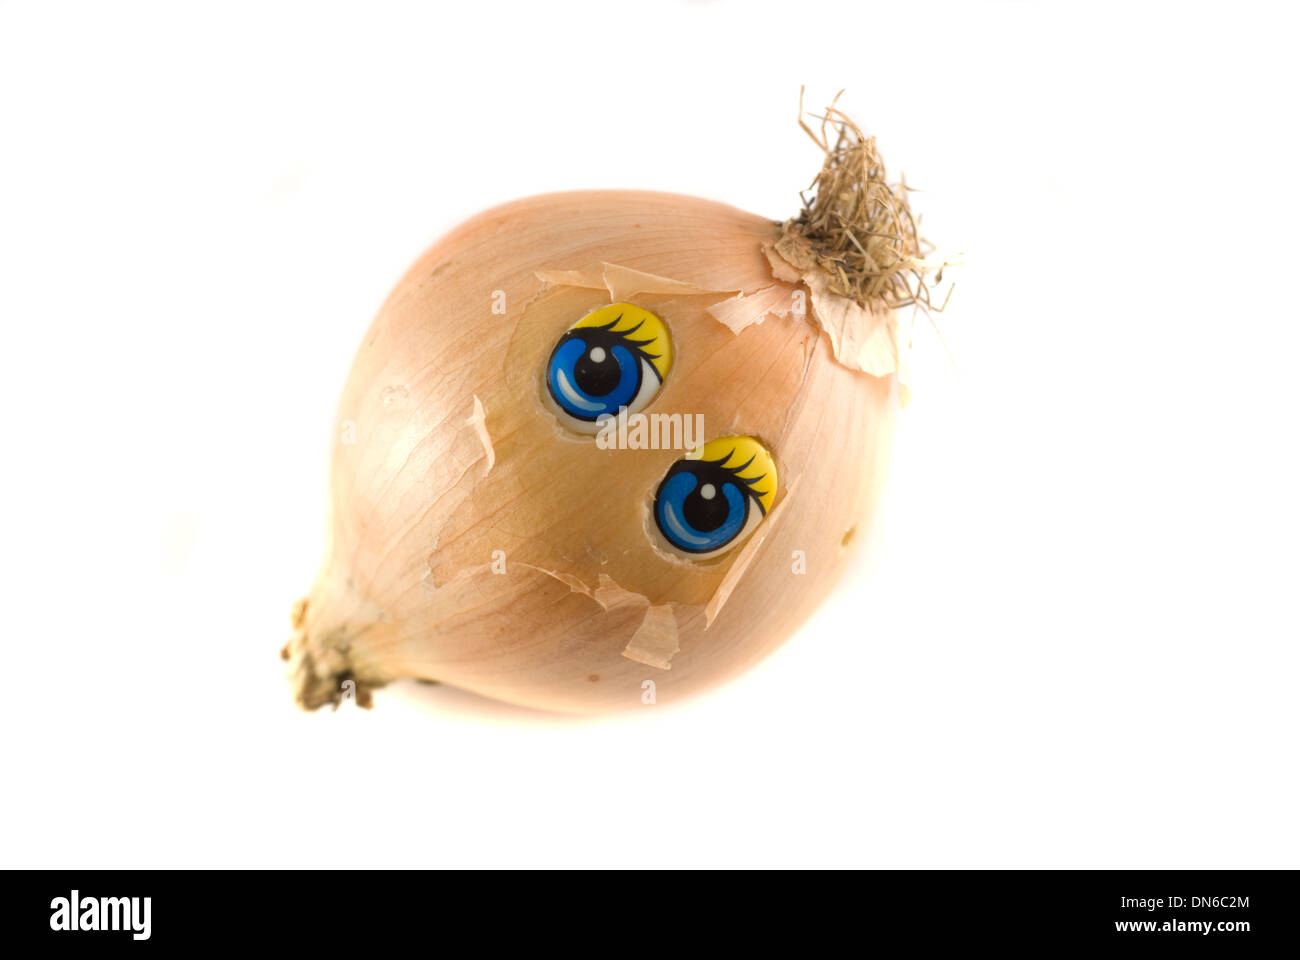 Funny onion with face, googly eyes Stock Photo - Alamy